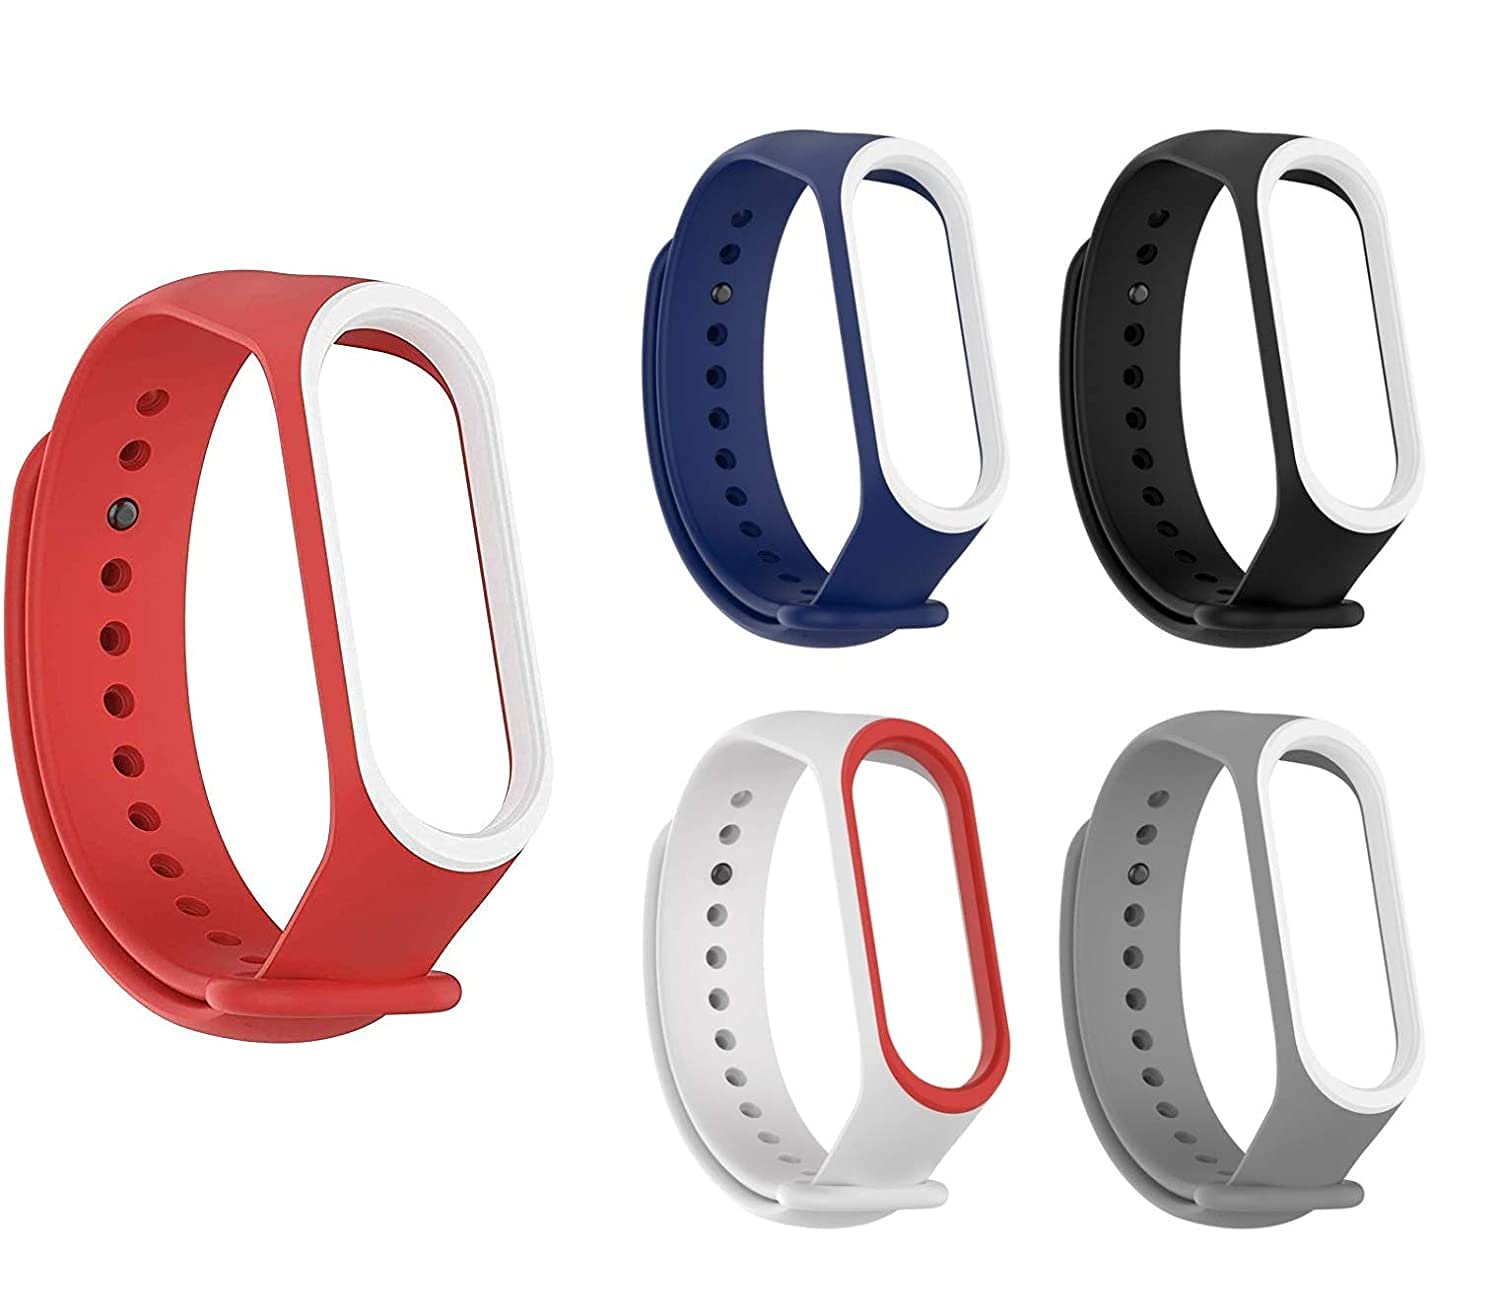 MYVN Adjustable Pack of 5 Xiaomi Mi Band 3/ Mi Band 4 Watch Silicone Strap  Belt Band Bracelet (Not Compatible with Mi Band 1/2) : Amazon.in: Jewellery